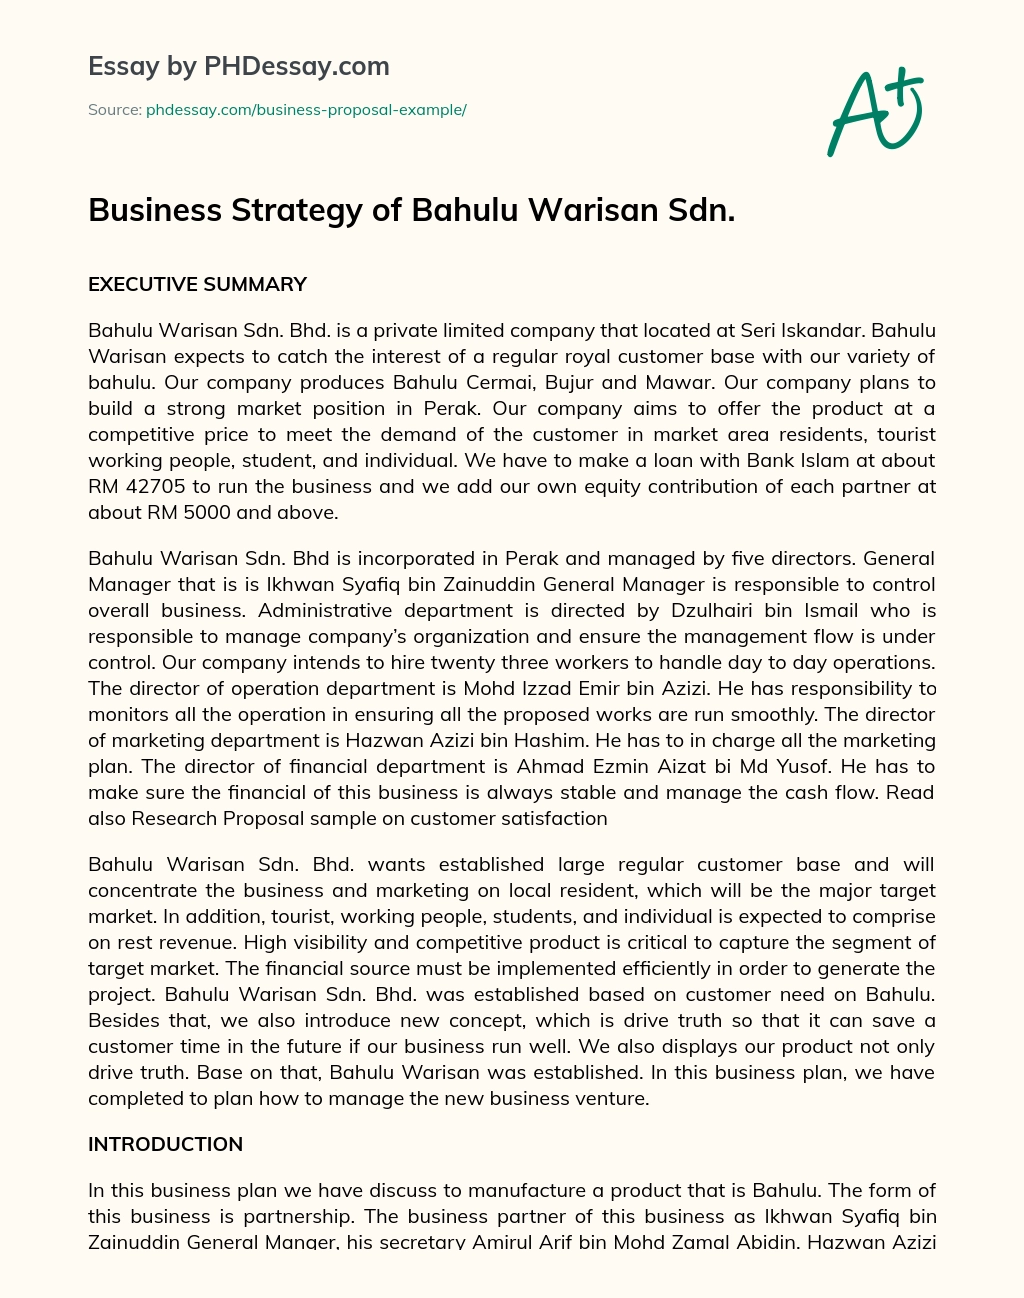 Business Strategy of Bahulu Warisan Sdn. essay